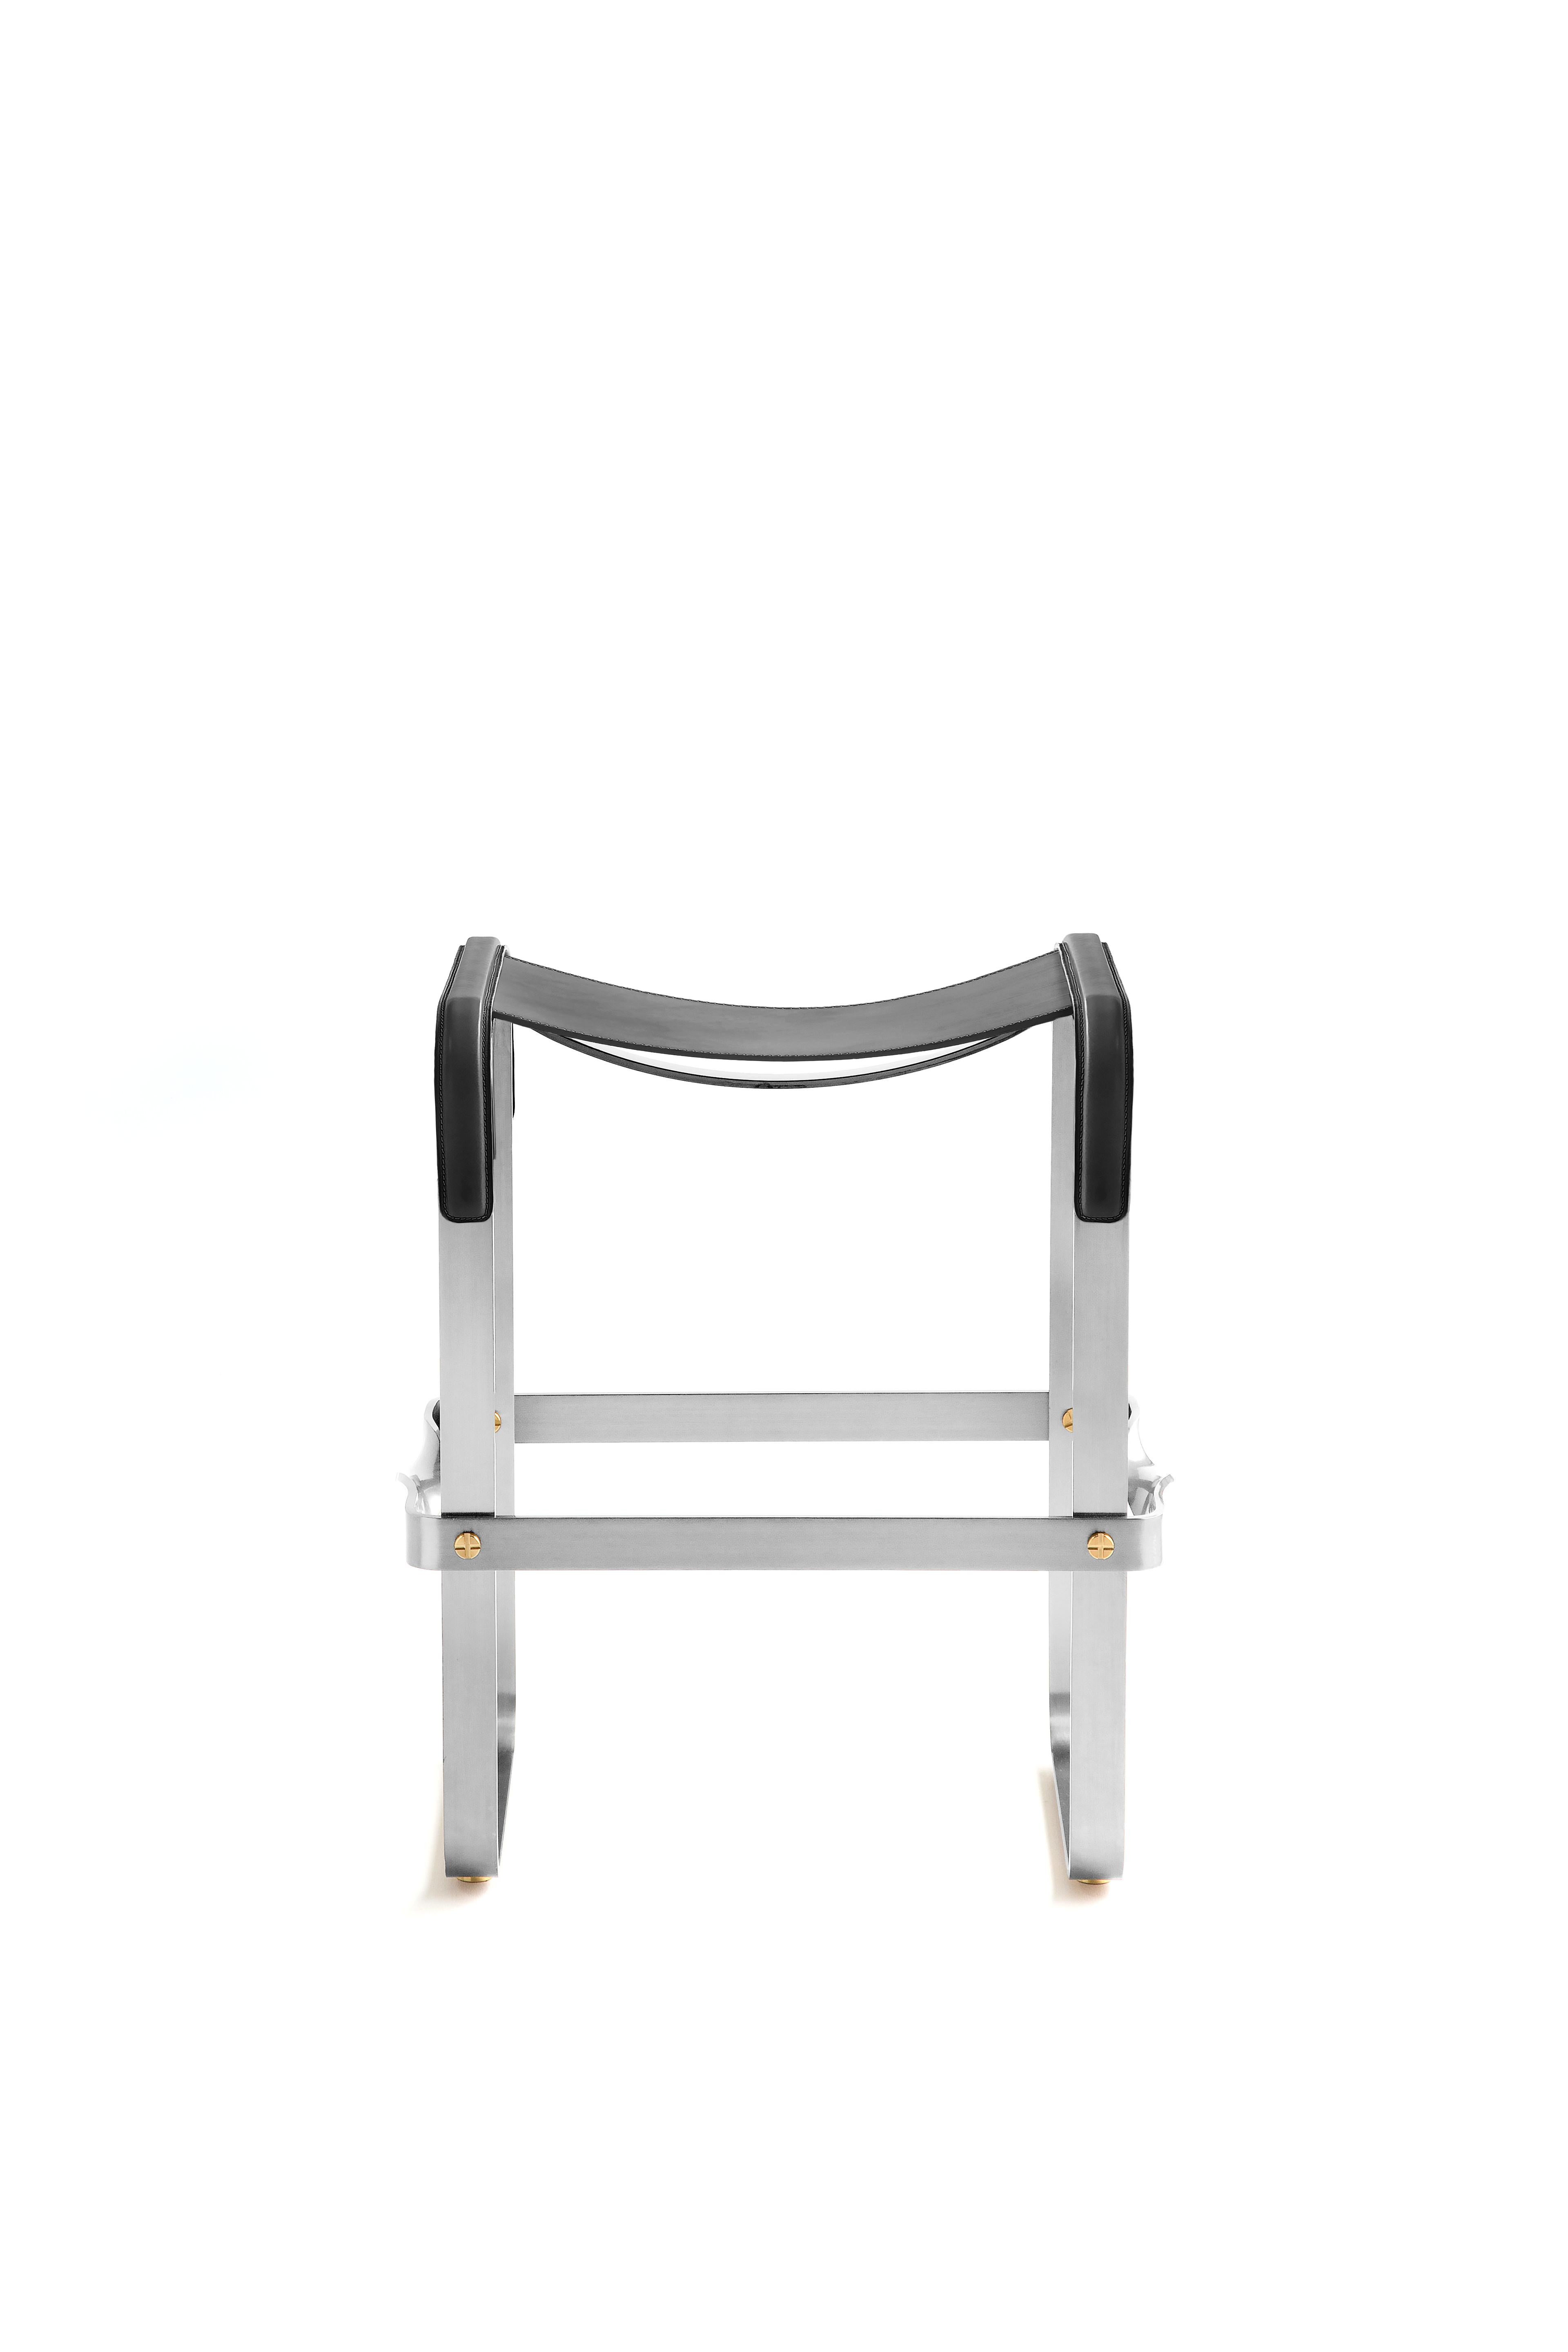 The Wanderlust contemporary counter stool belongs to a collection of minimalist and serene pieces where exclusivity and precision are shown in small details such as the hand-turned metal nuts and bolts that fix the leather surfaces, that go